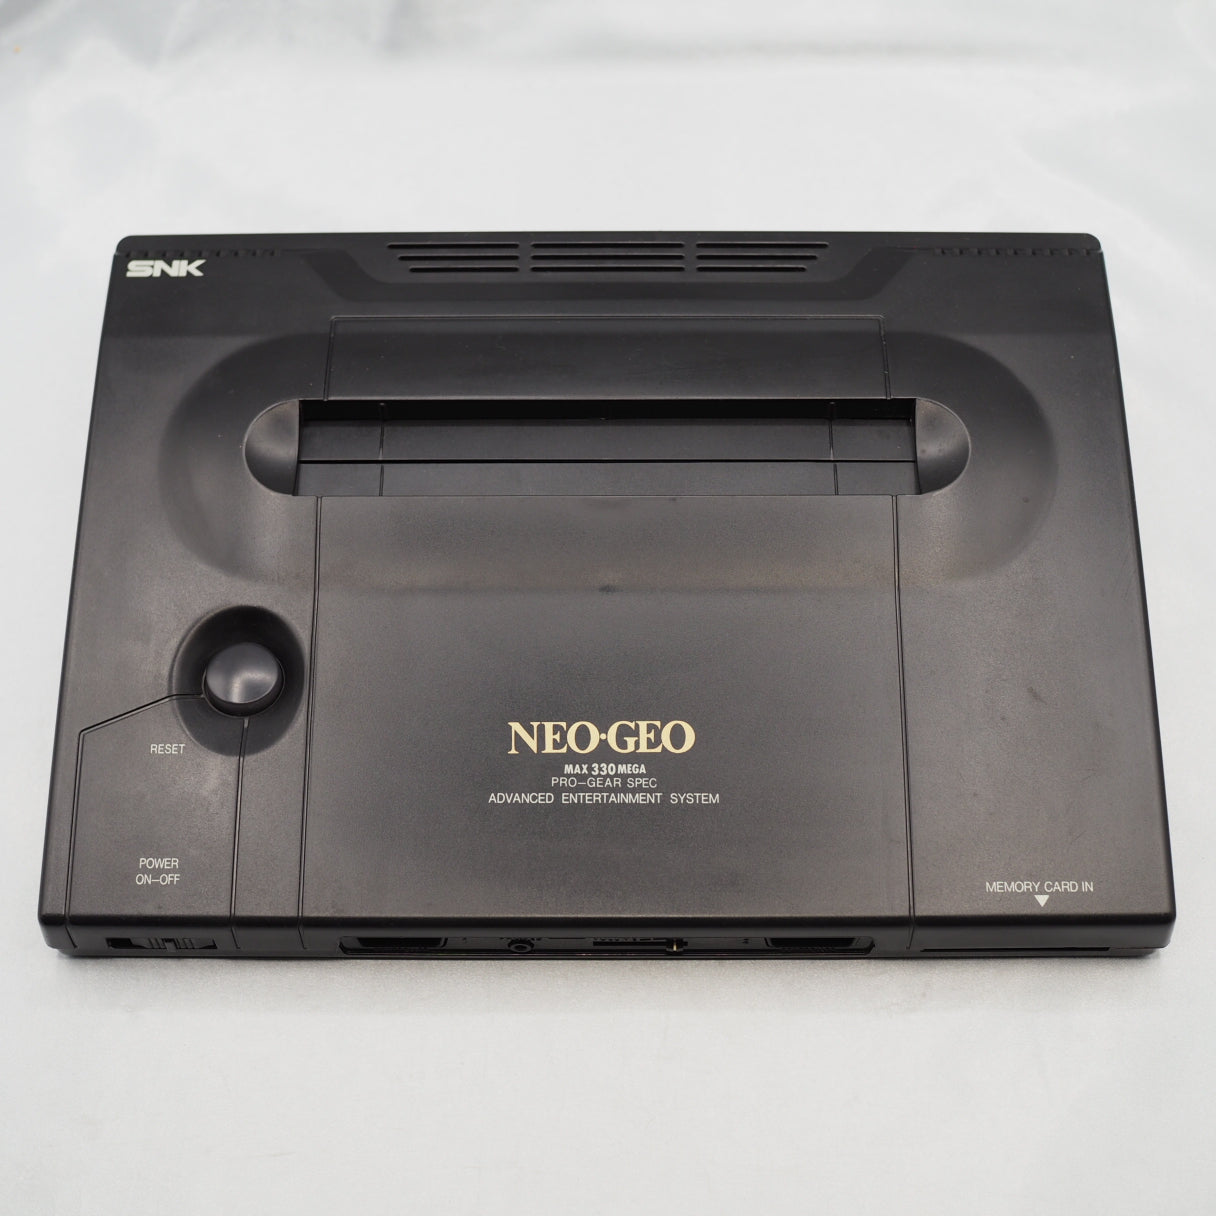 NEO GEO AES Console System Boxed